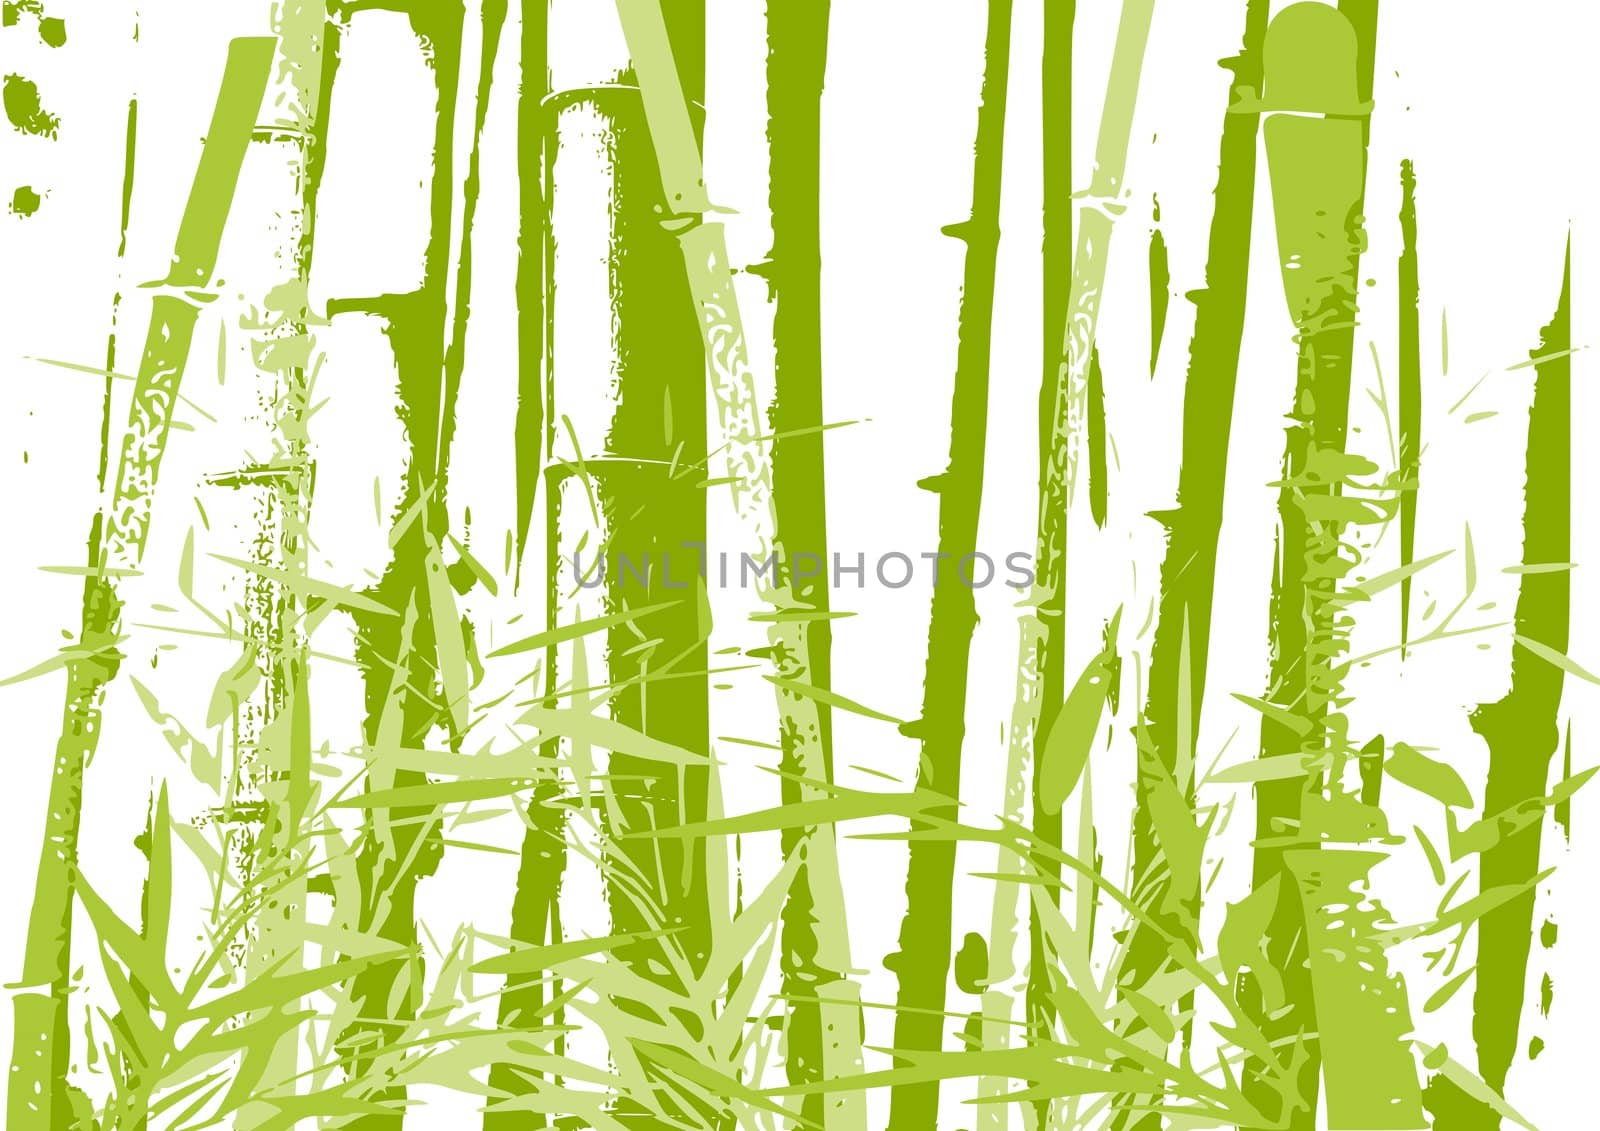 Abstract illustration of a bamboo forest